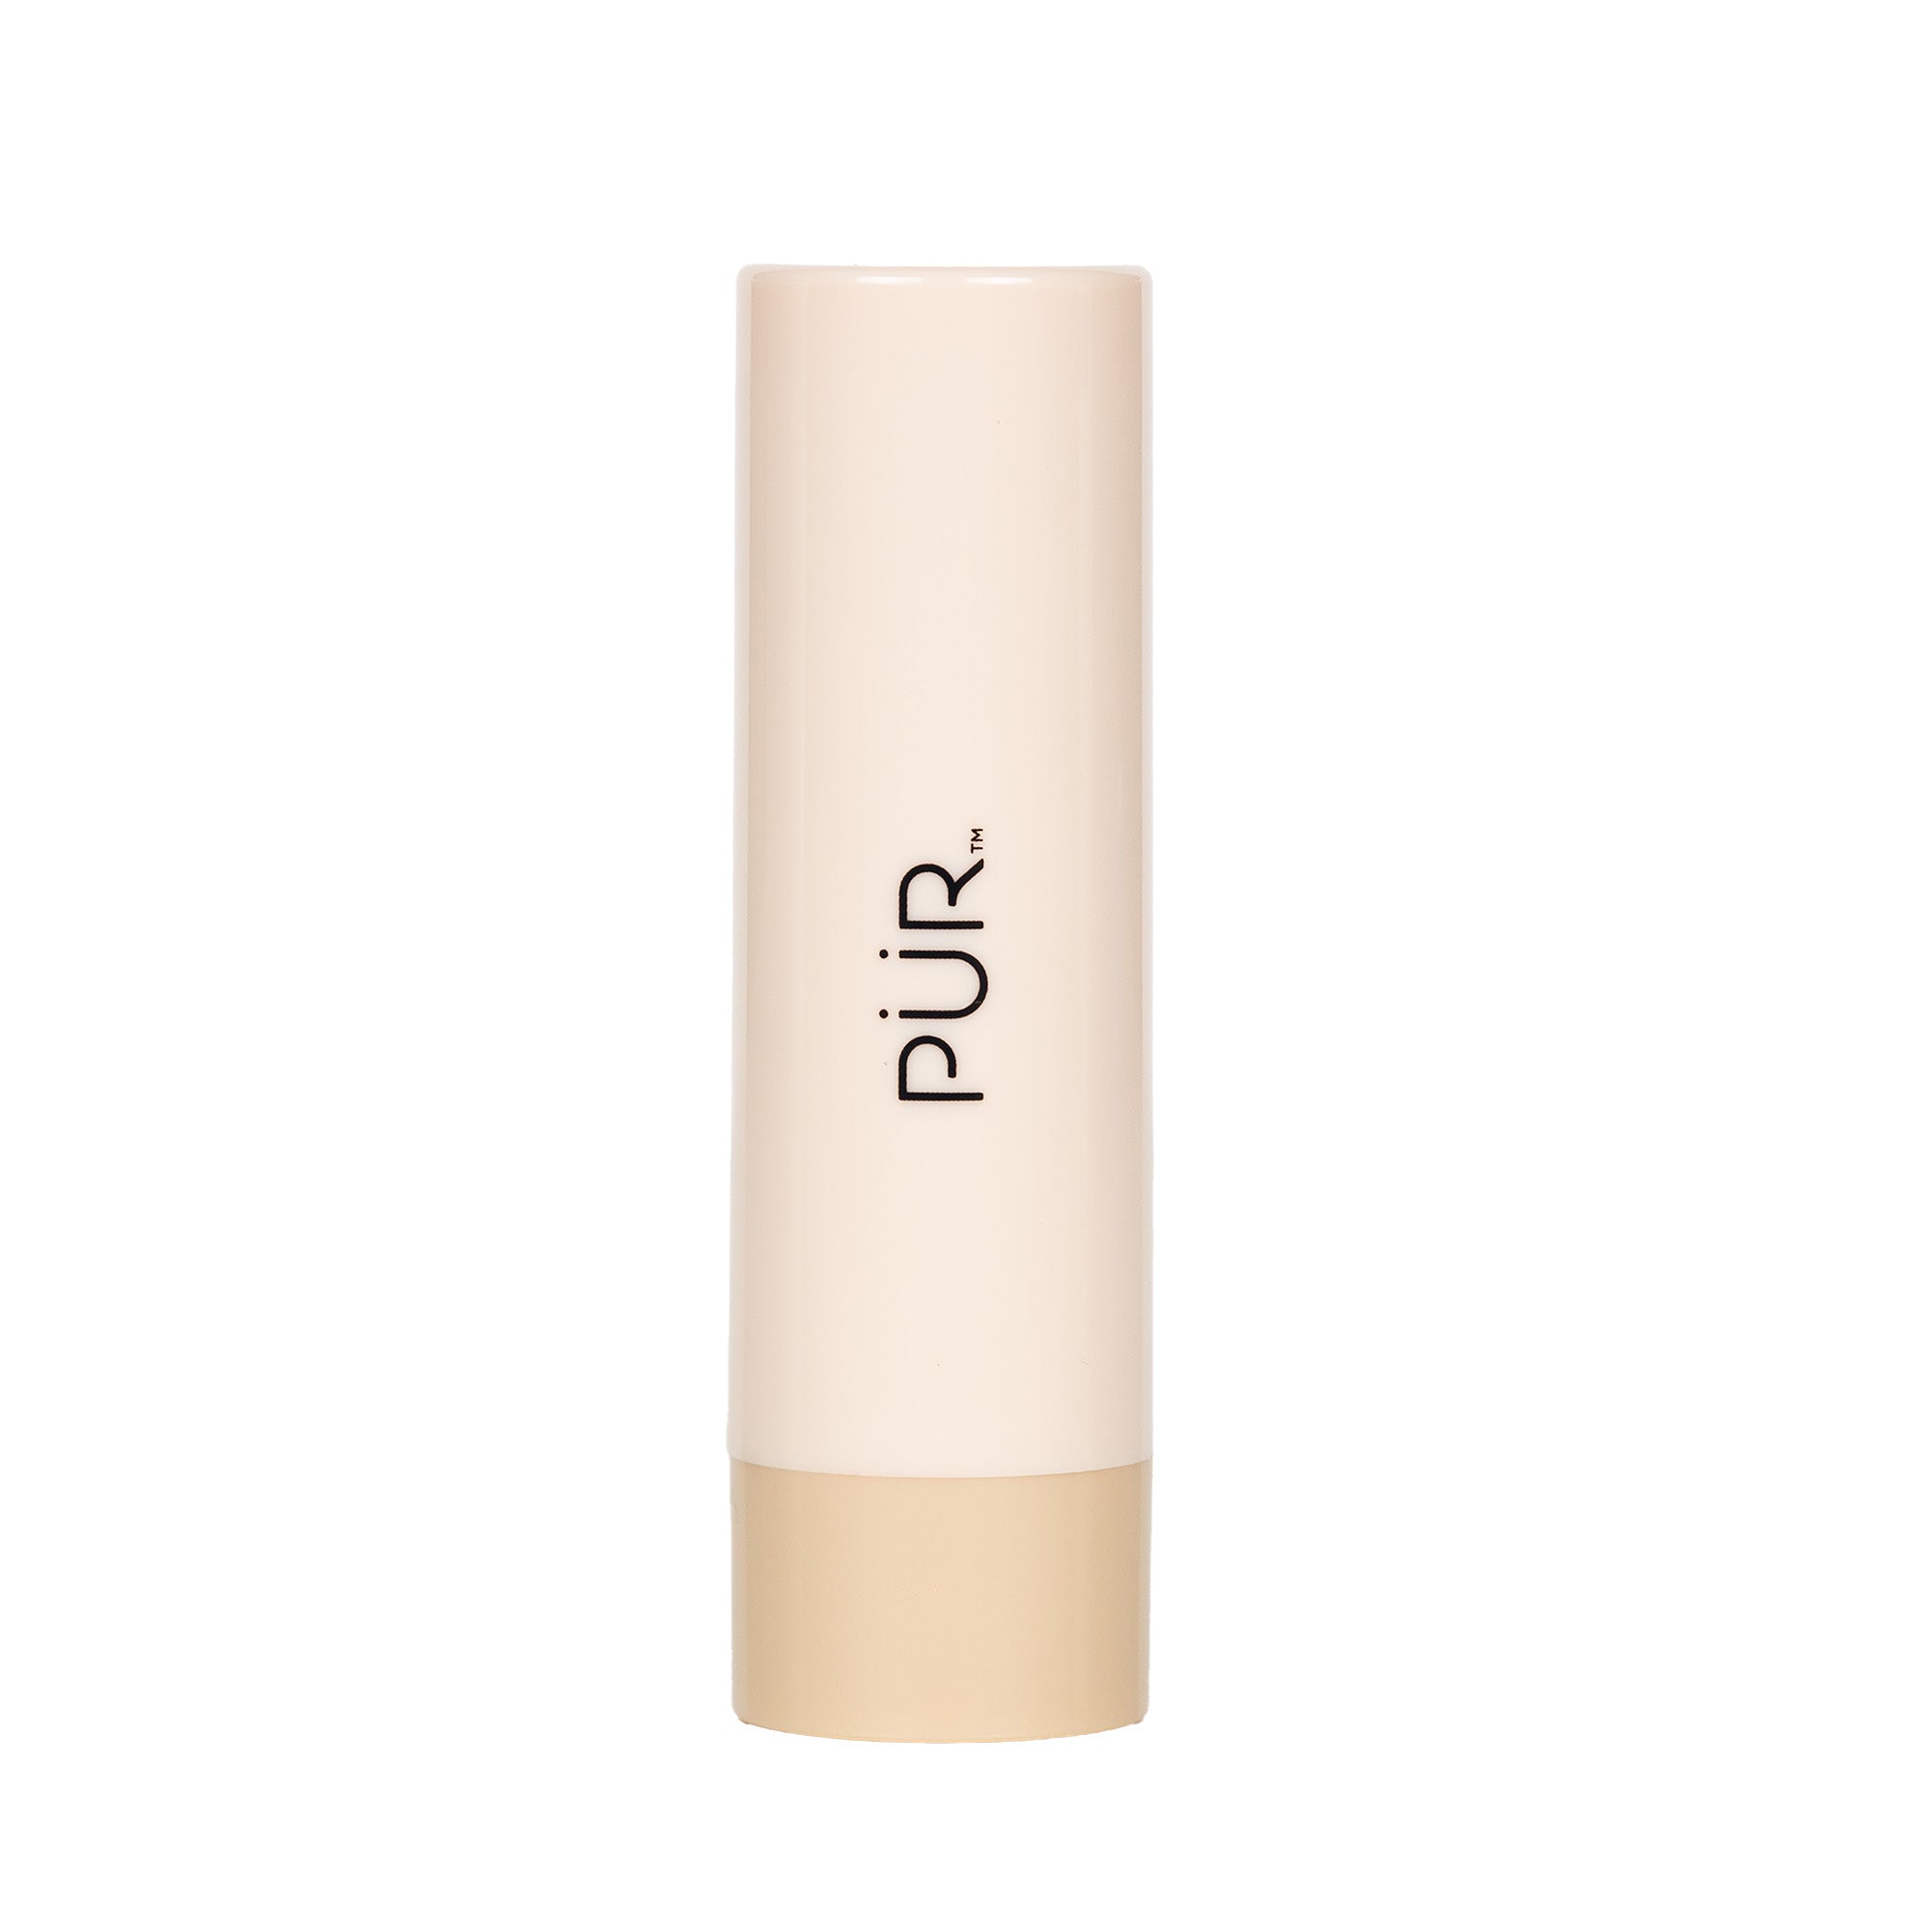 Silky Tint Creamy Multitasking Stick with Peptides.